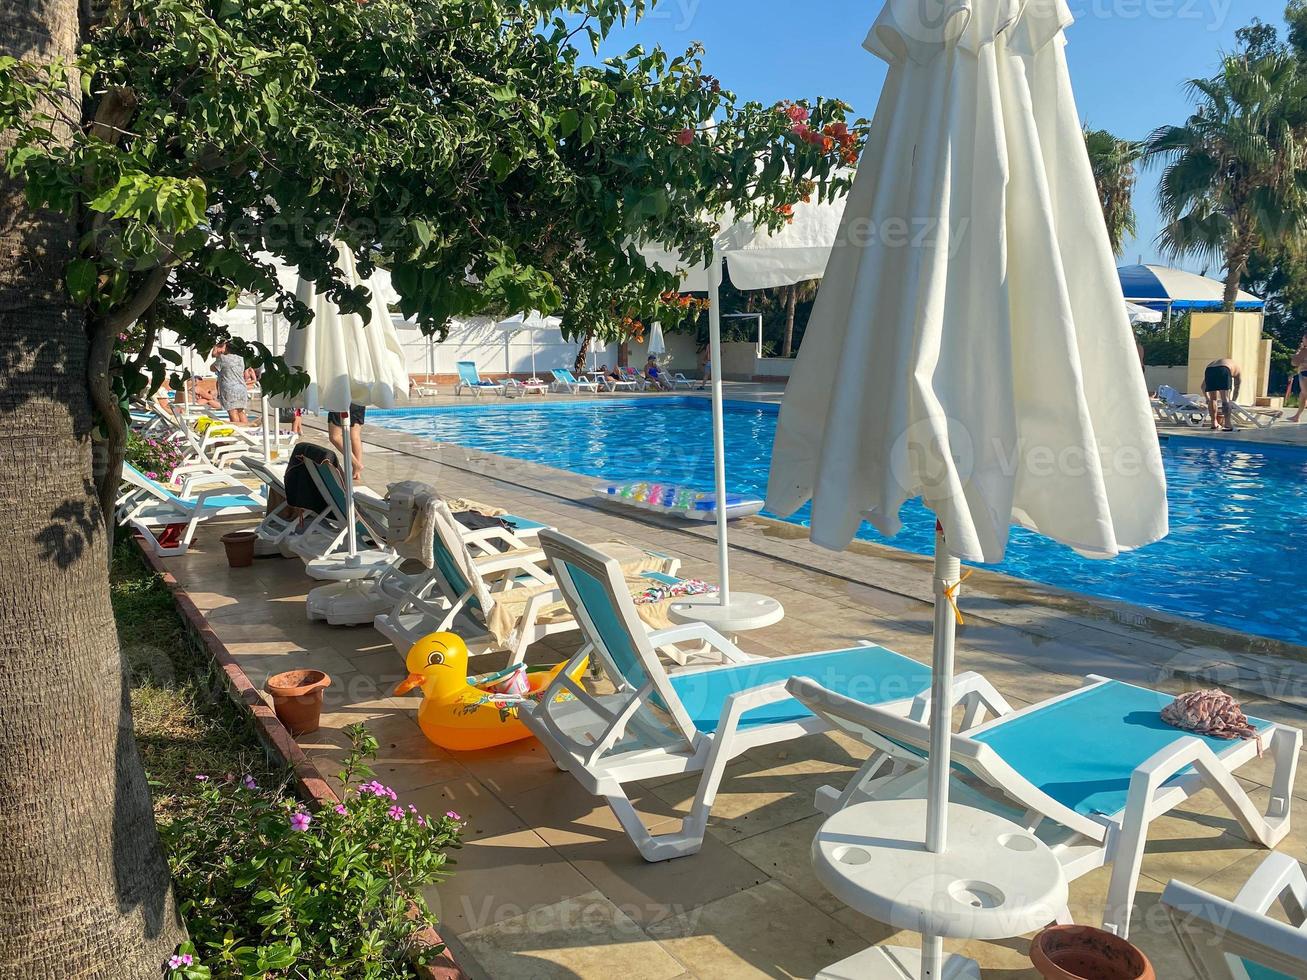 Sun loungers for relaxing and sunbathing with sun umbrellas near the pool for swimming and chilling in the hotel on vacation in a paradise warm eastern tropical country resort photo